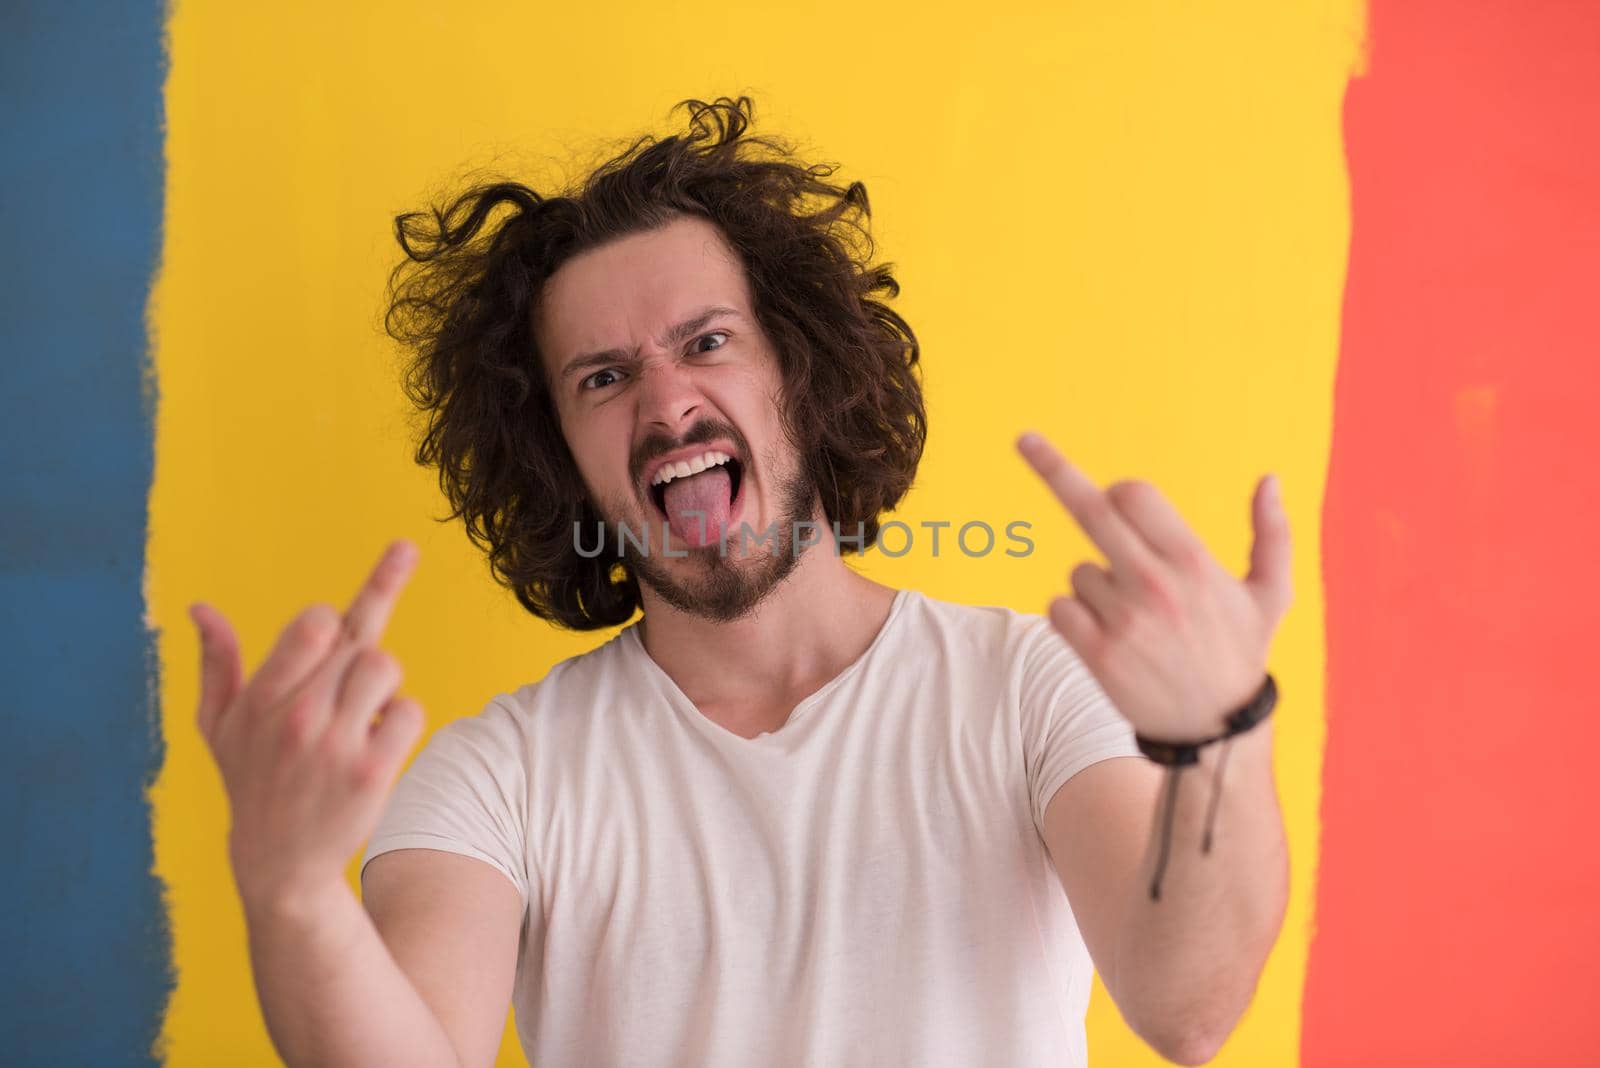 Portrait of a beautiful  young man with funny hair over color background with copyspace expressing different emotions